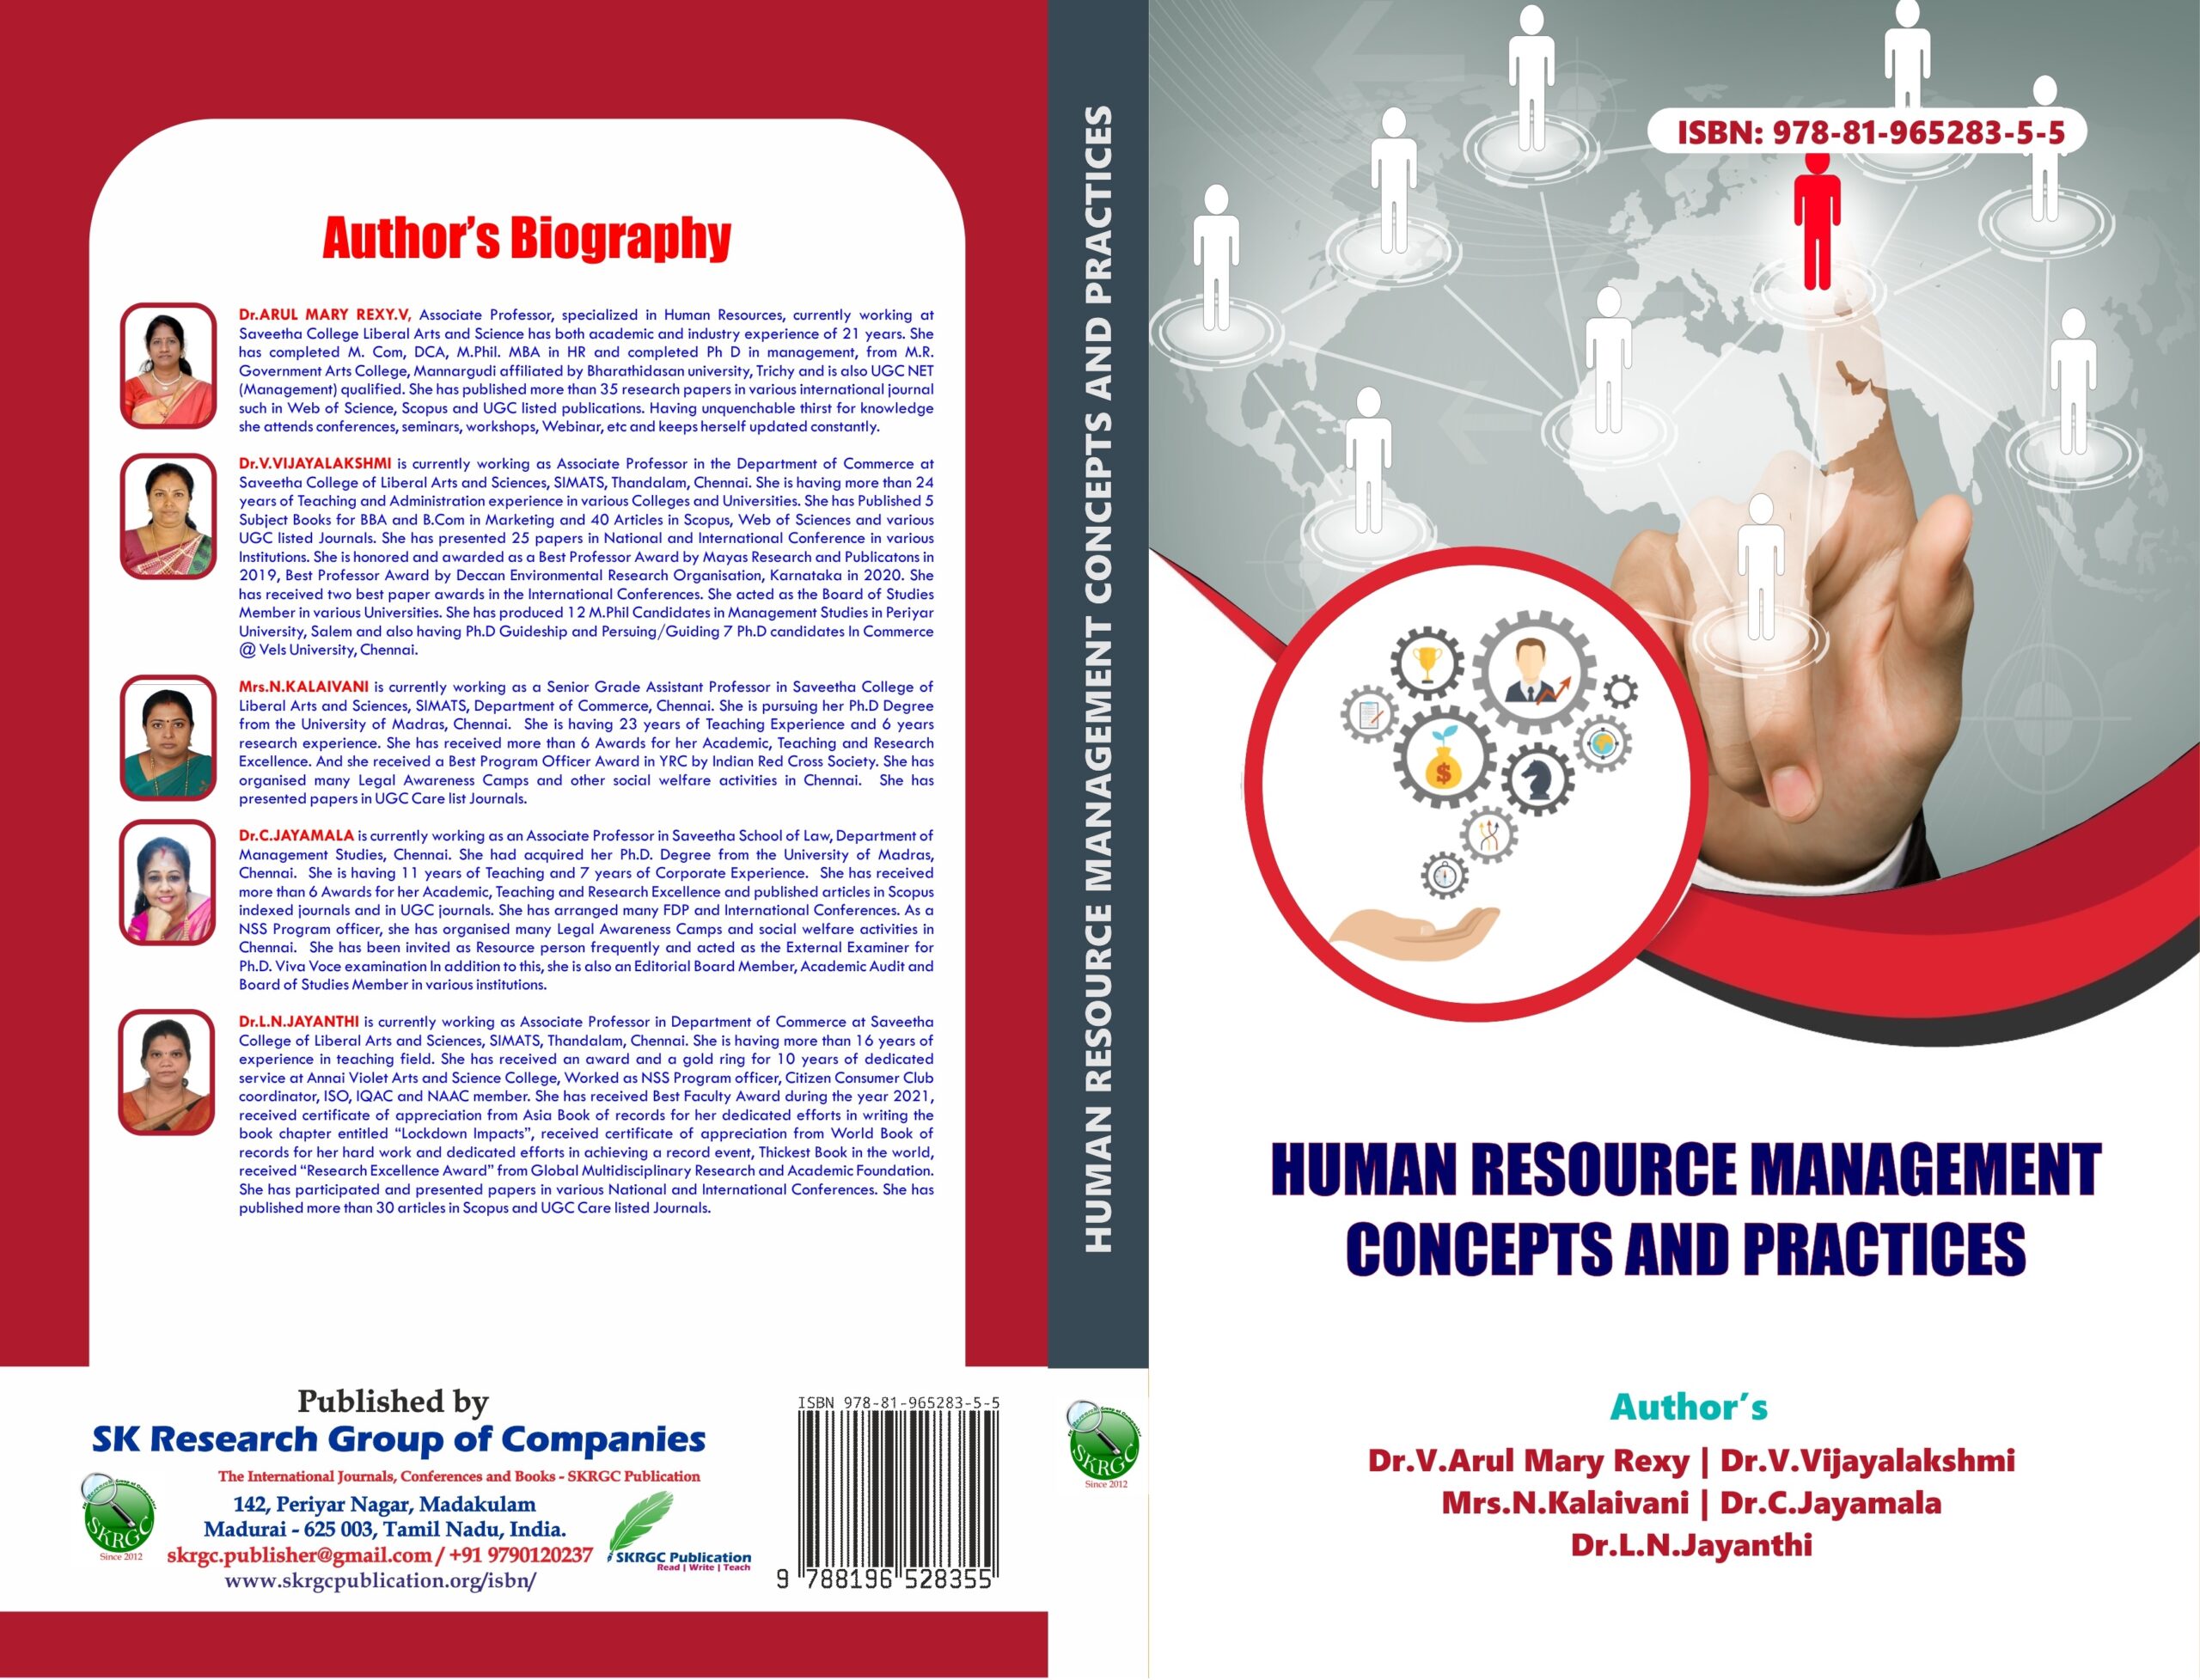 HUMAN RESOURCE MANAGEMENT CONCEPTS AND PRACTICES